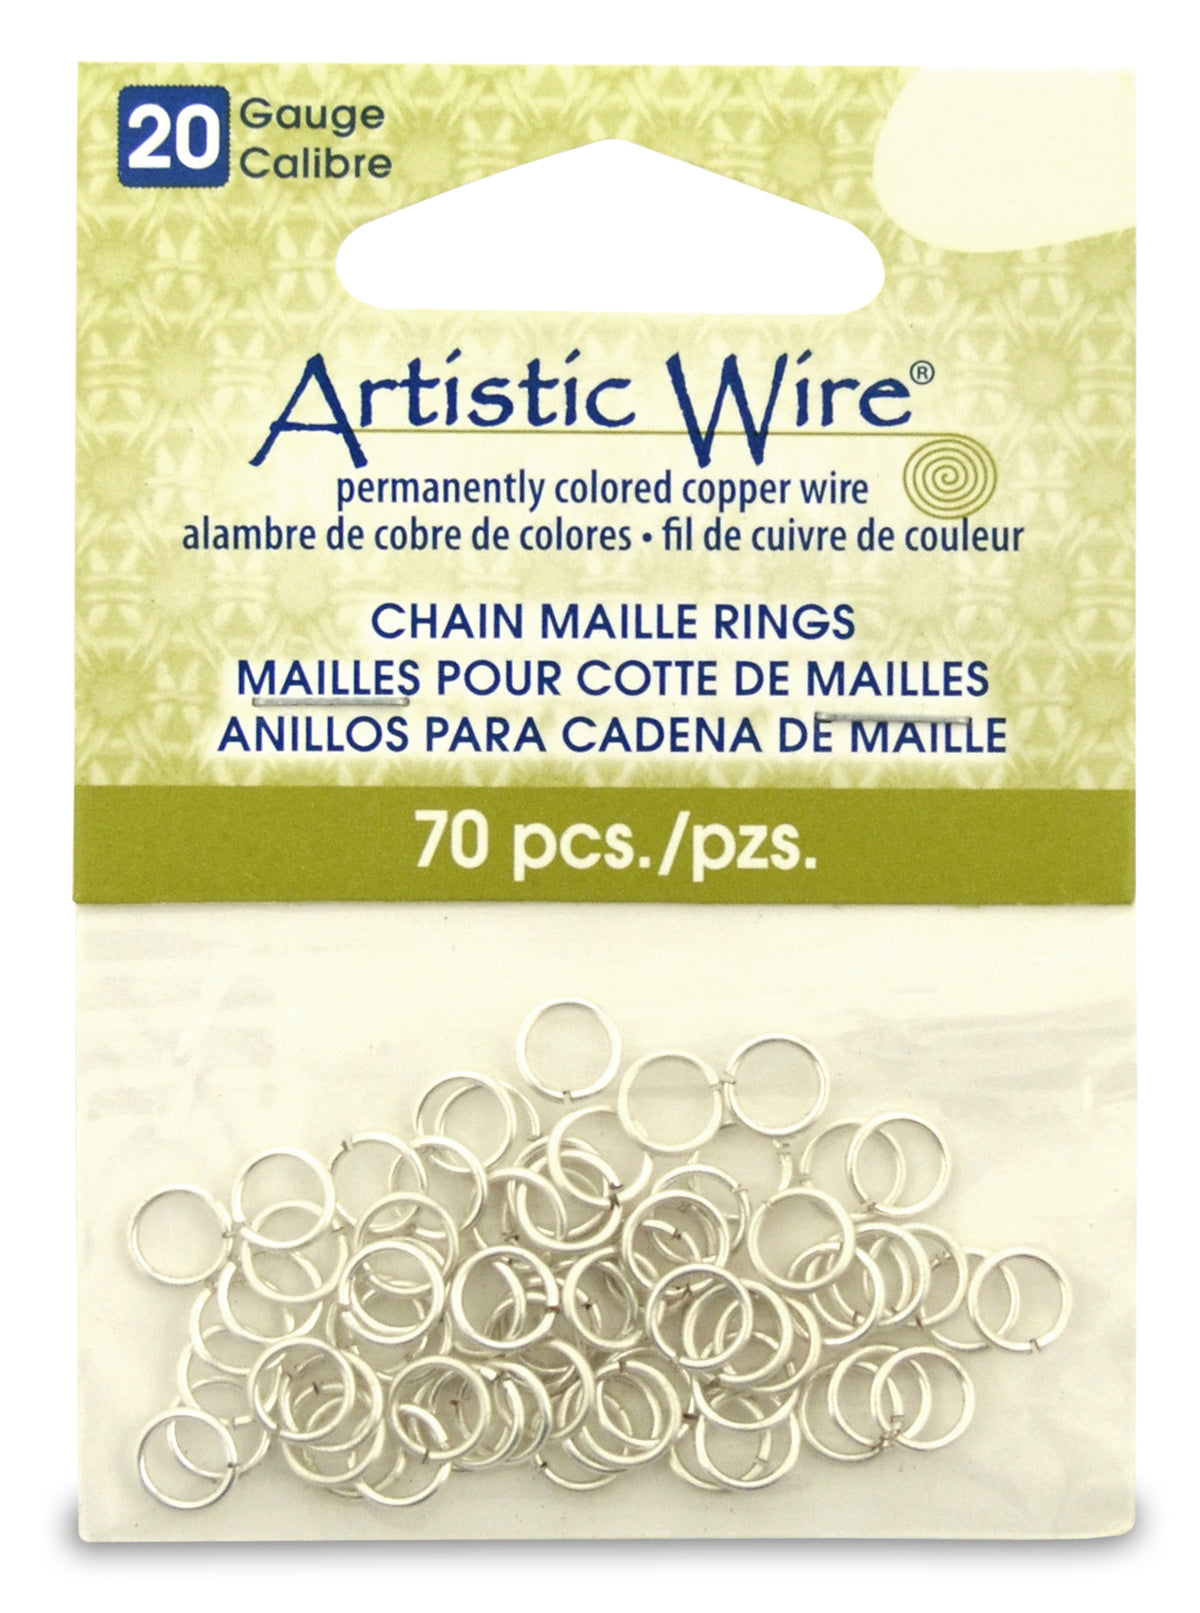 18 Gauge Artistic Wire, Chain Maille Rings, Round, Tarnish Resistant Silver, 9/64 in (3.57 mm), 70 pc